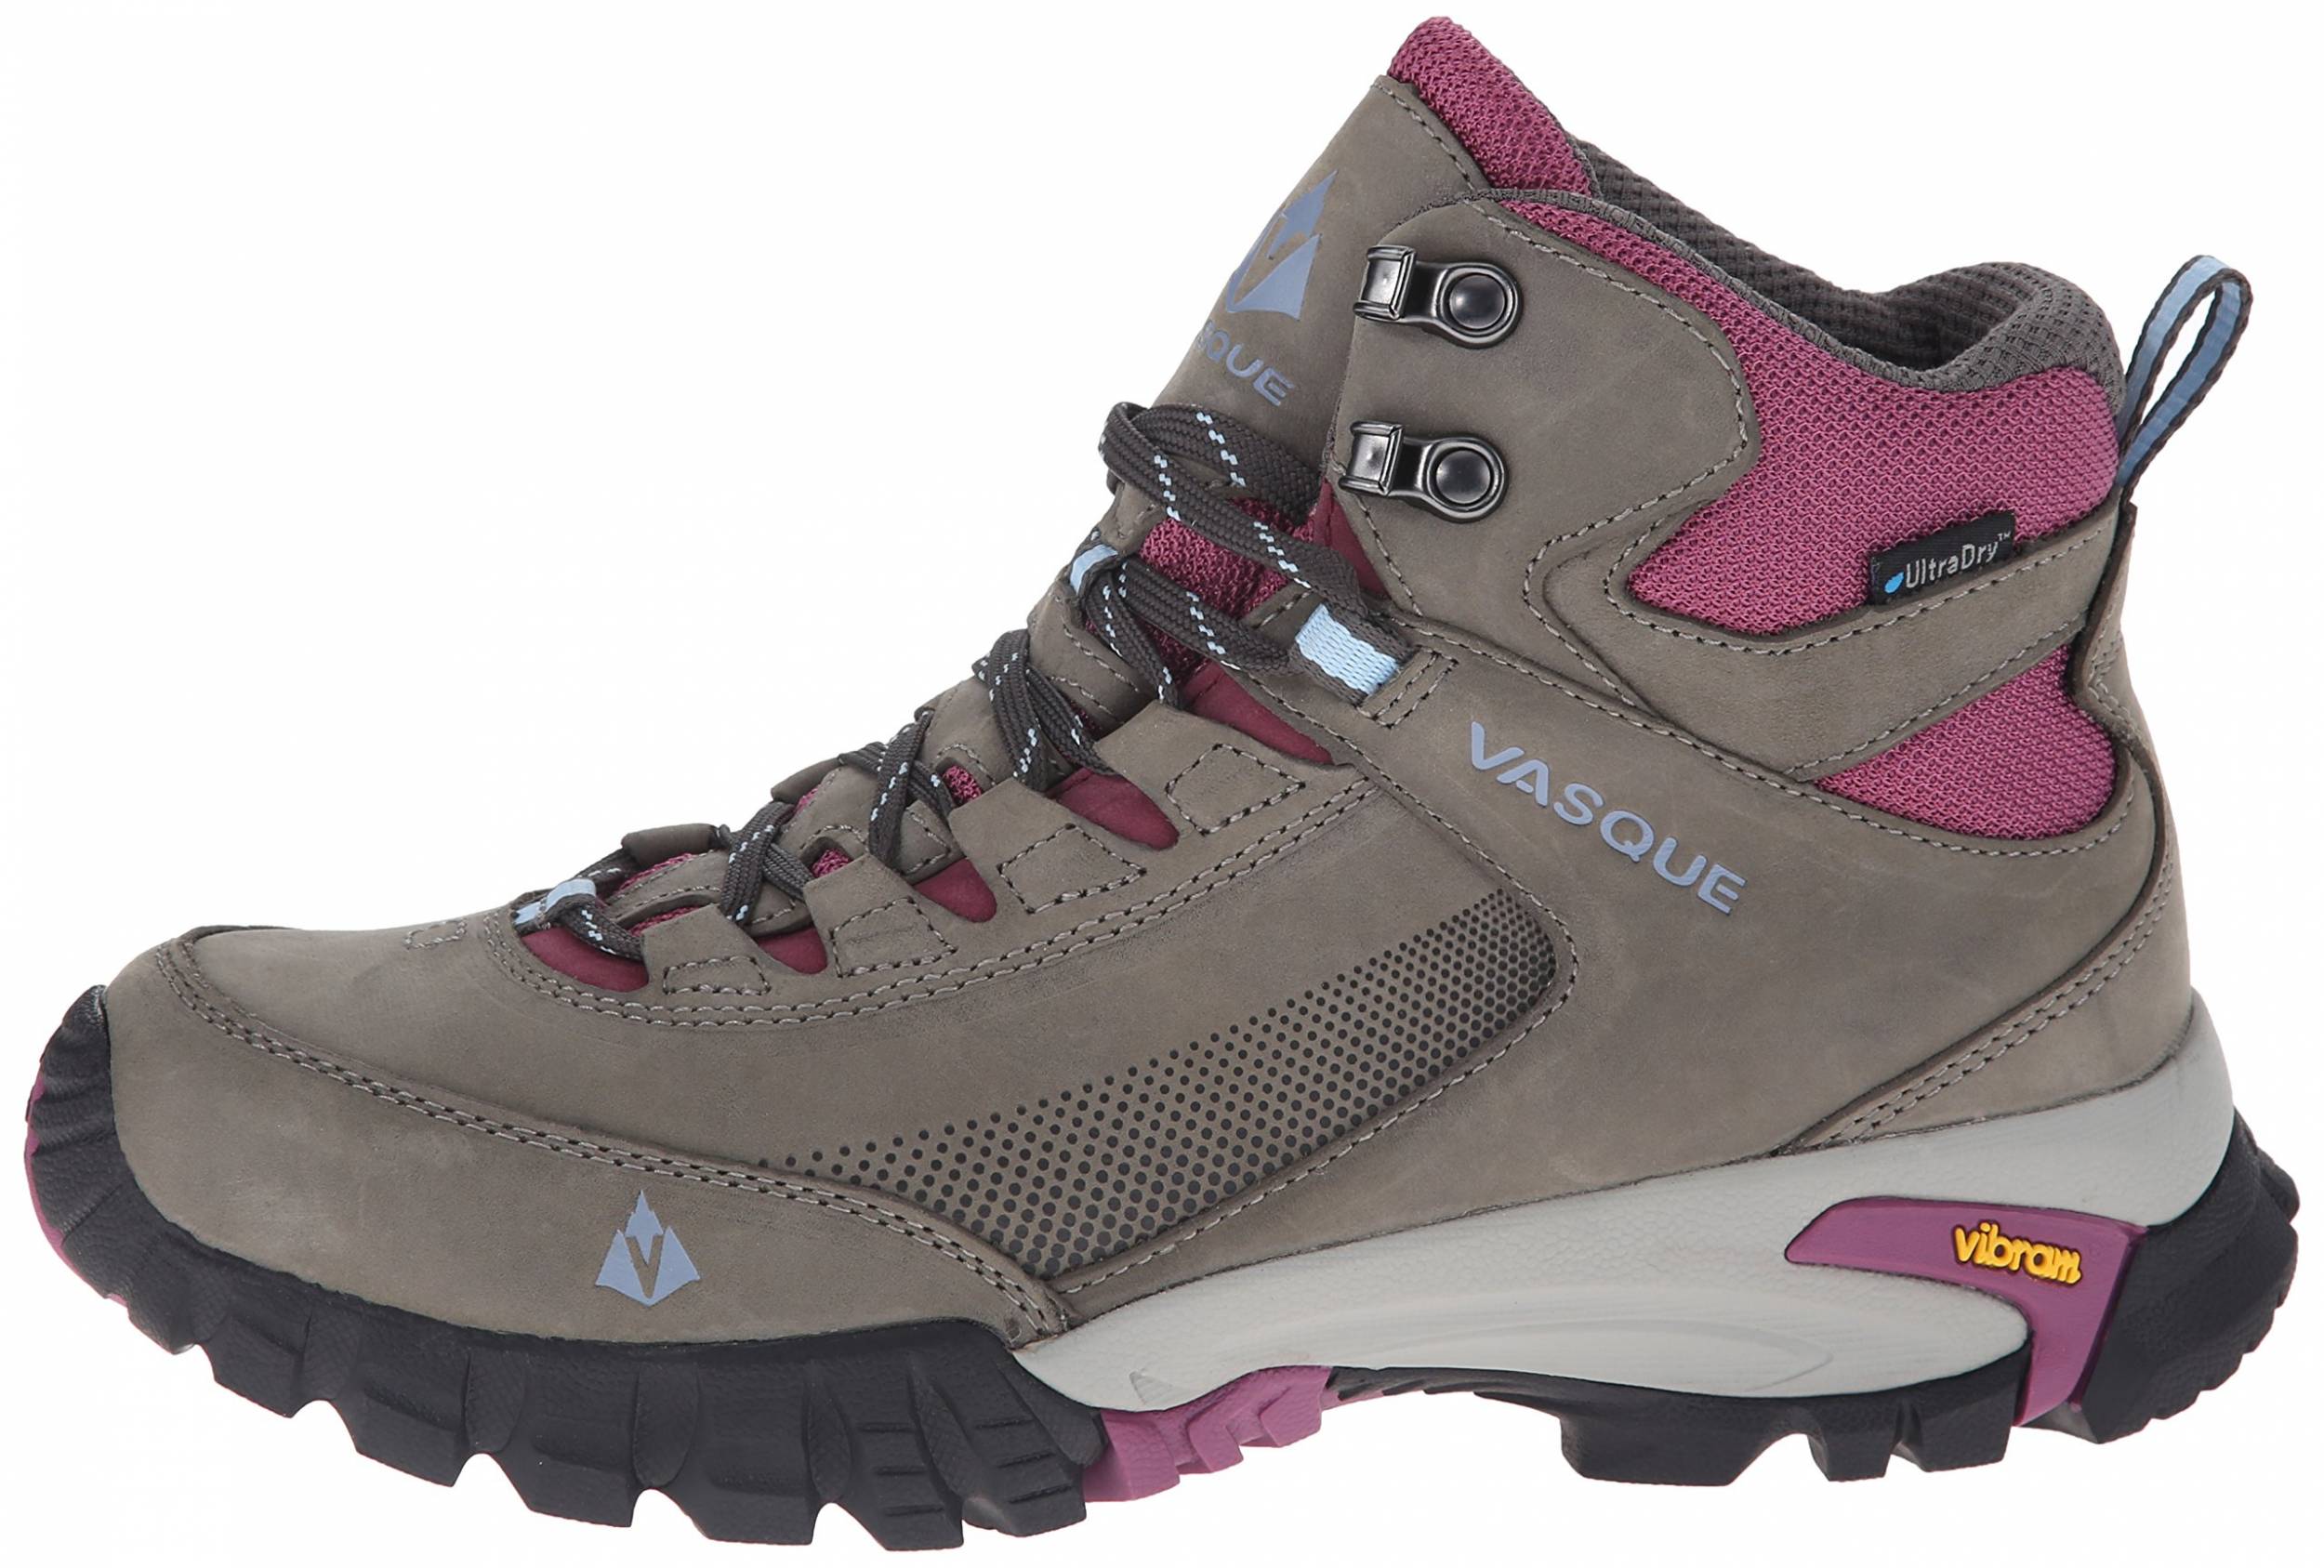 Vasque Womens Talus at Ud Mid Hiking Boot Sports & Outdoors Women's ...